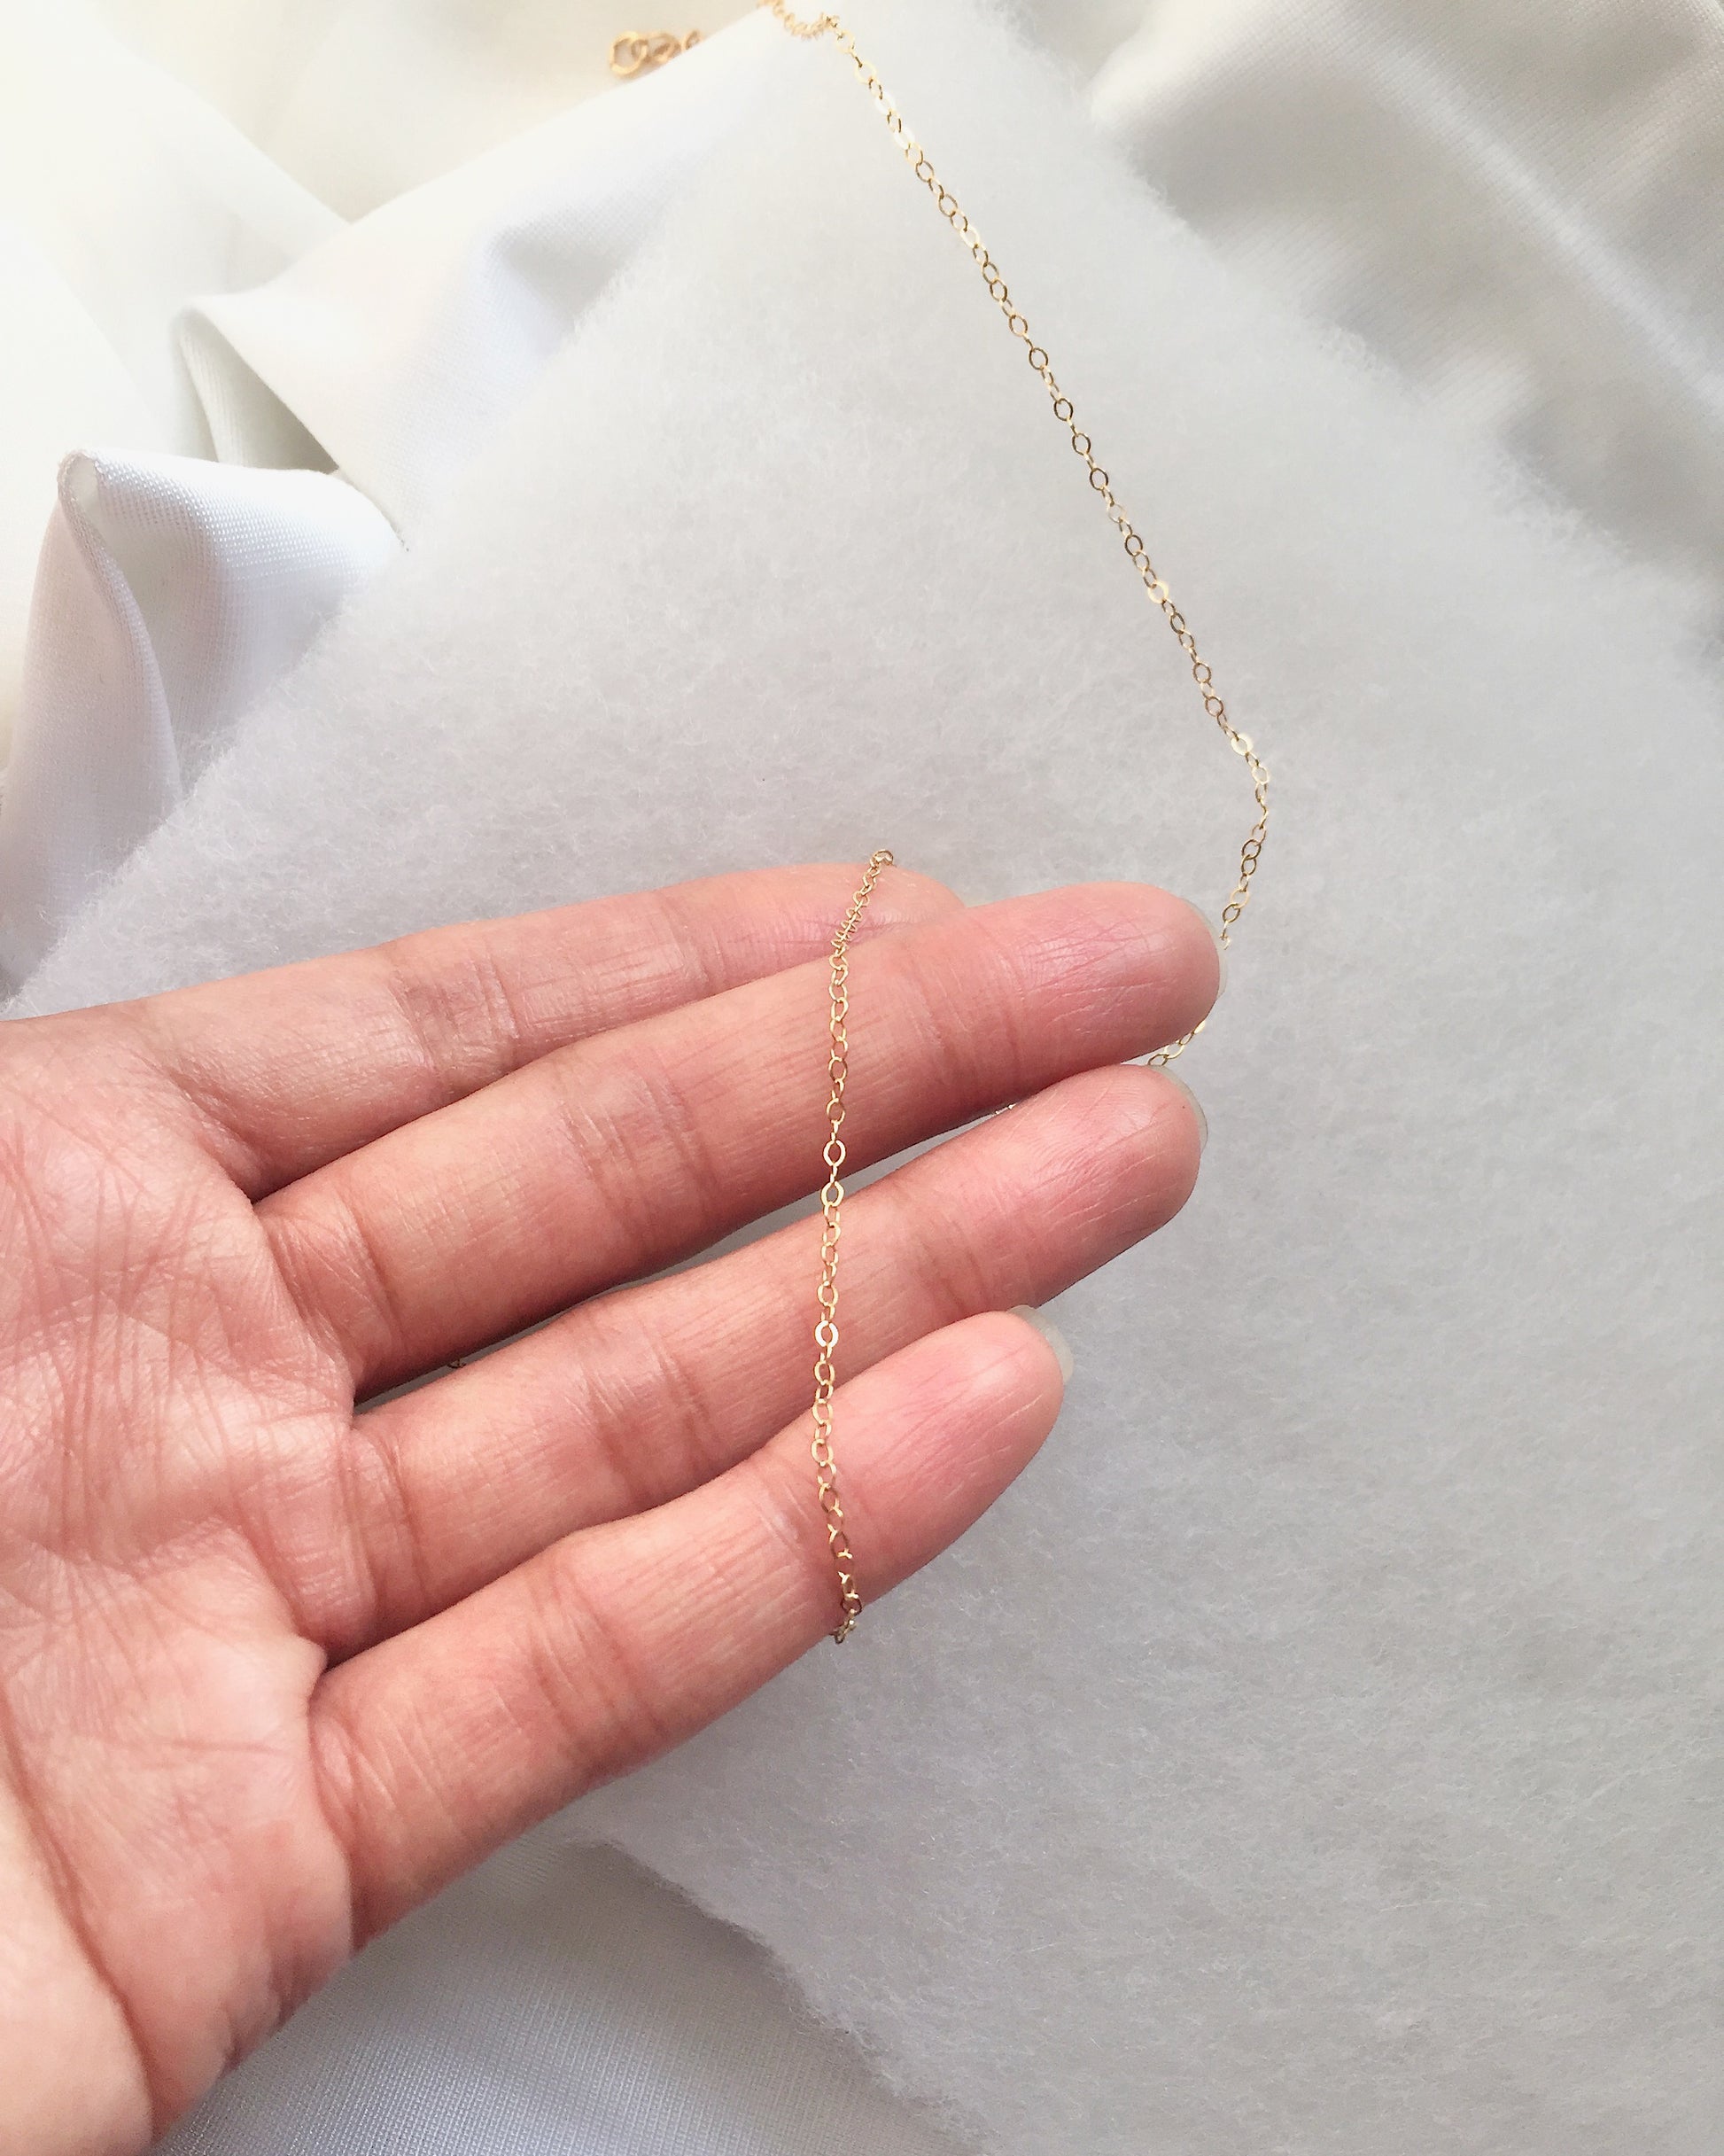 Dainty Thin Everyday Necklace | Plain Delicate Chain Necklace | IB Jewelry